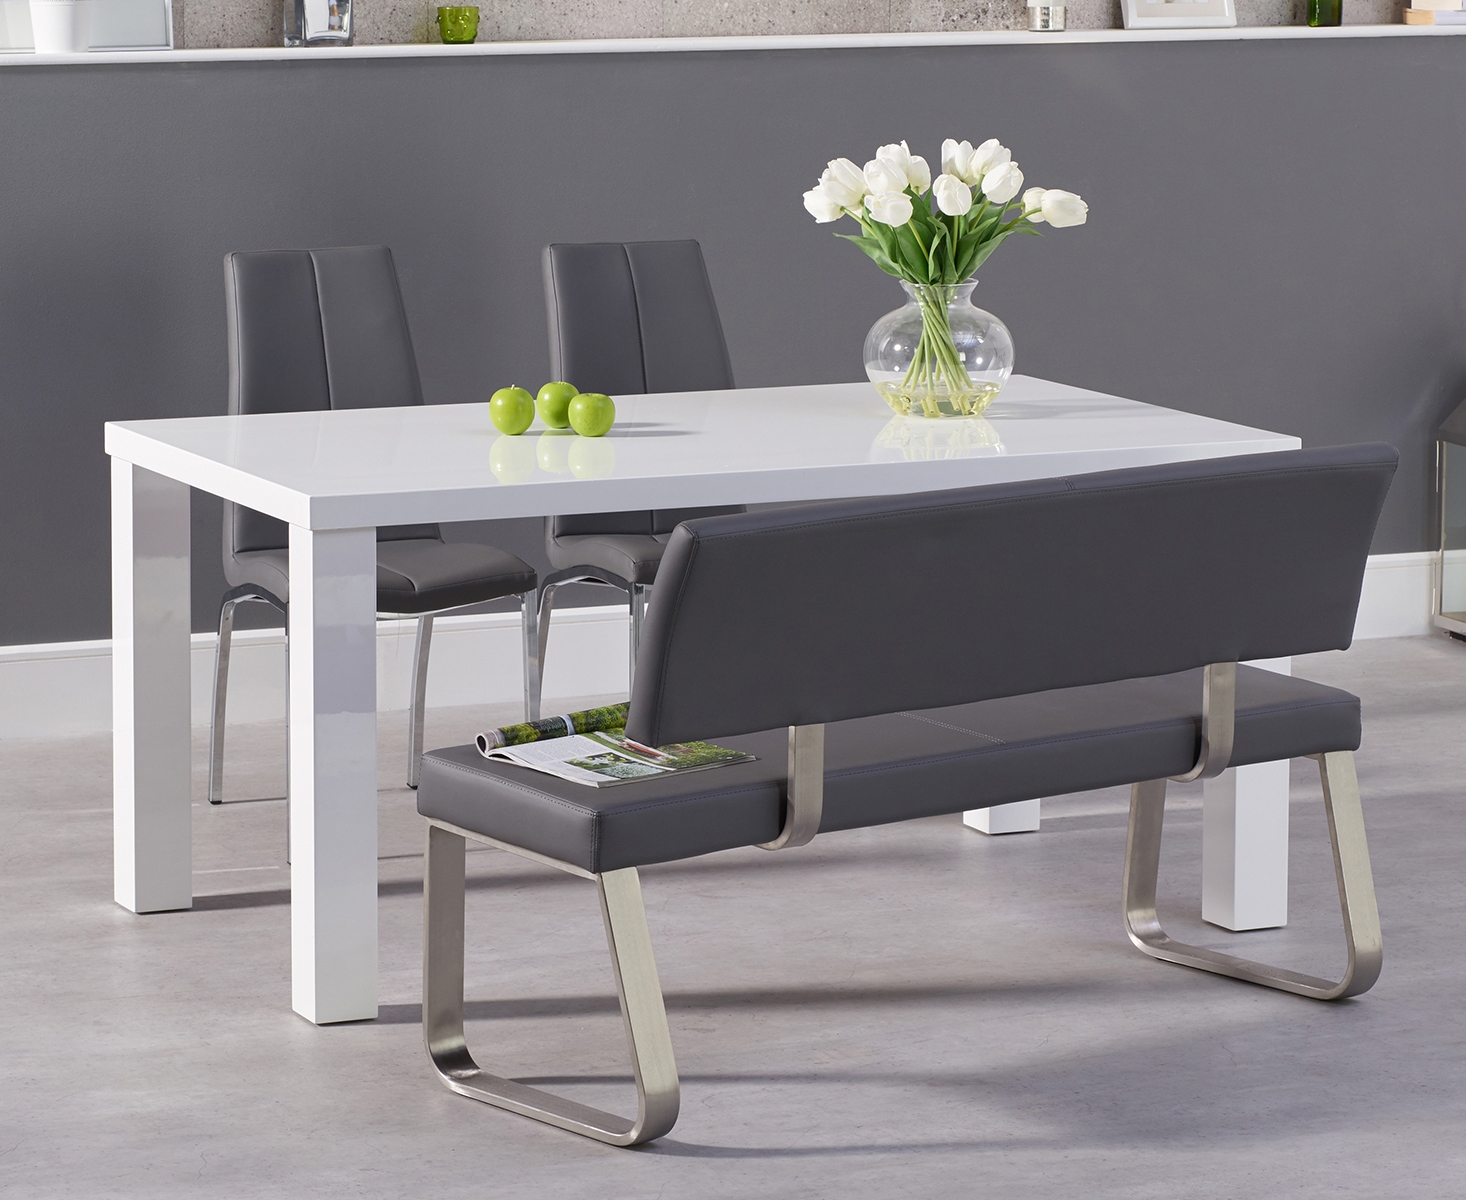 Photo 1 of Seattle 160cm white high gloss dining table with 4 grey marco chairs with 2 grey benches